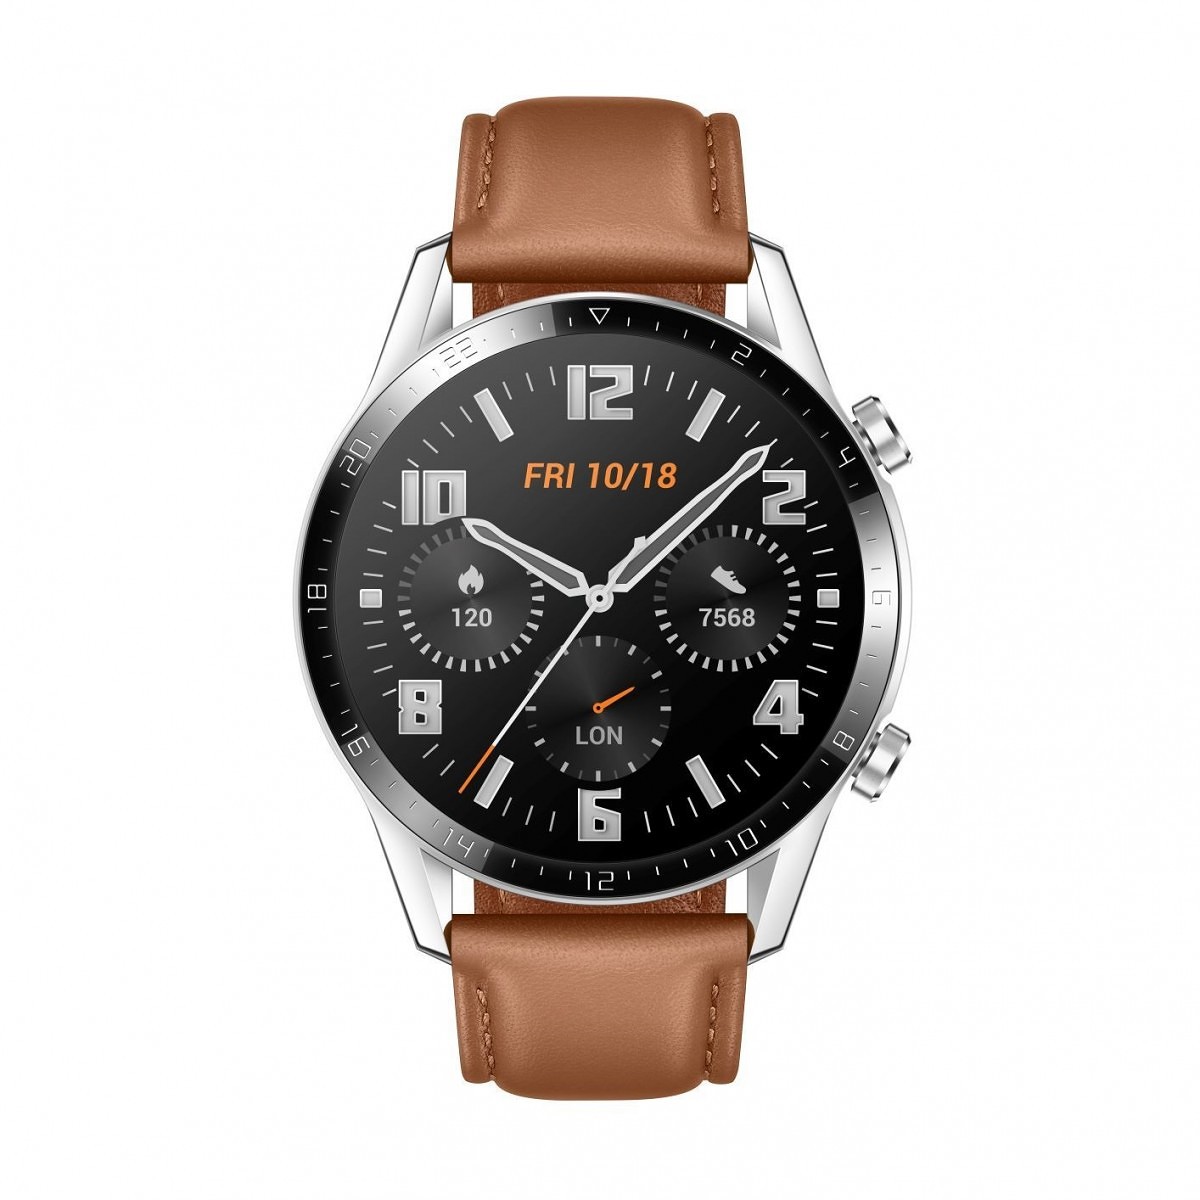 Huawei Watch GT 2 now available in India